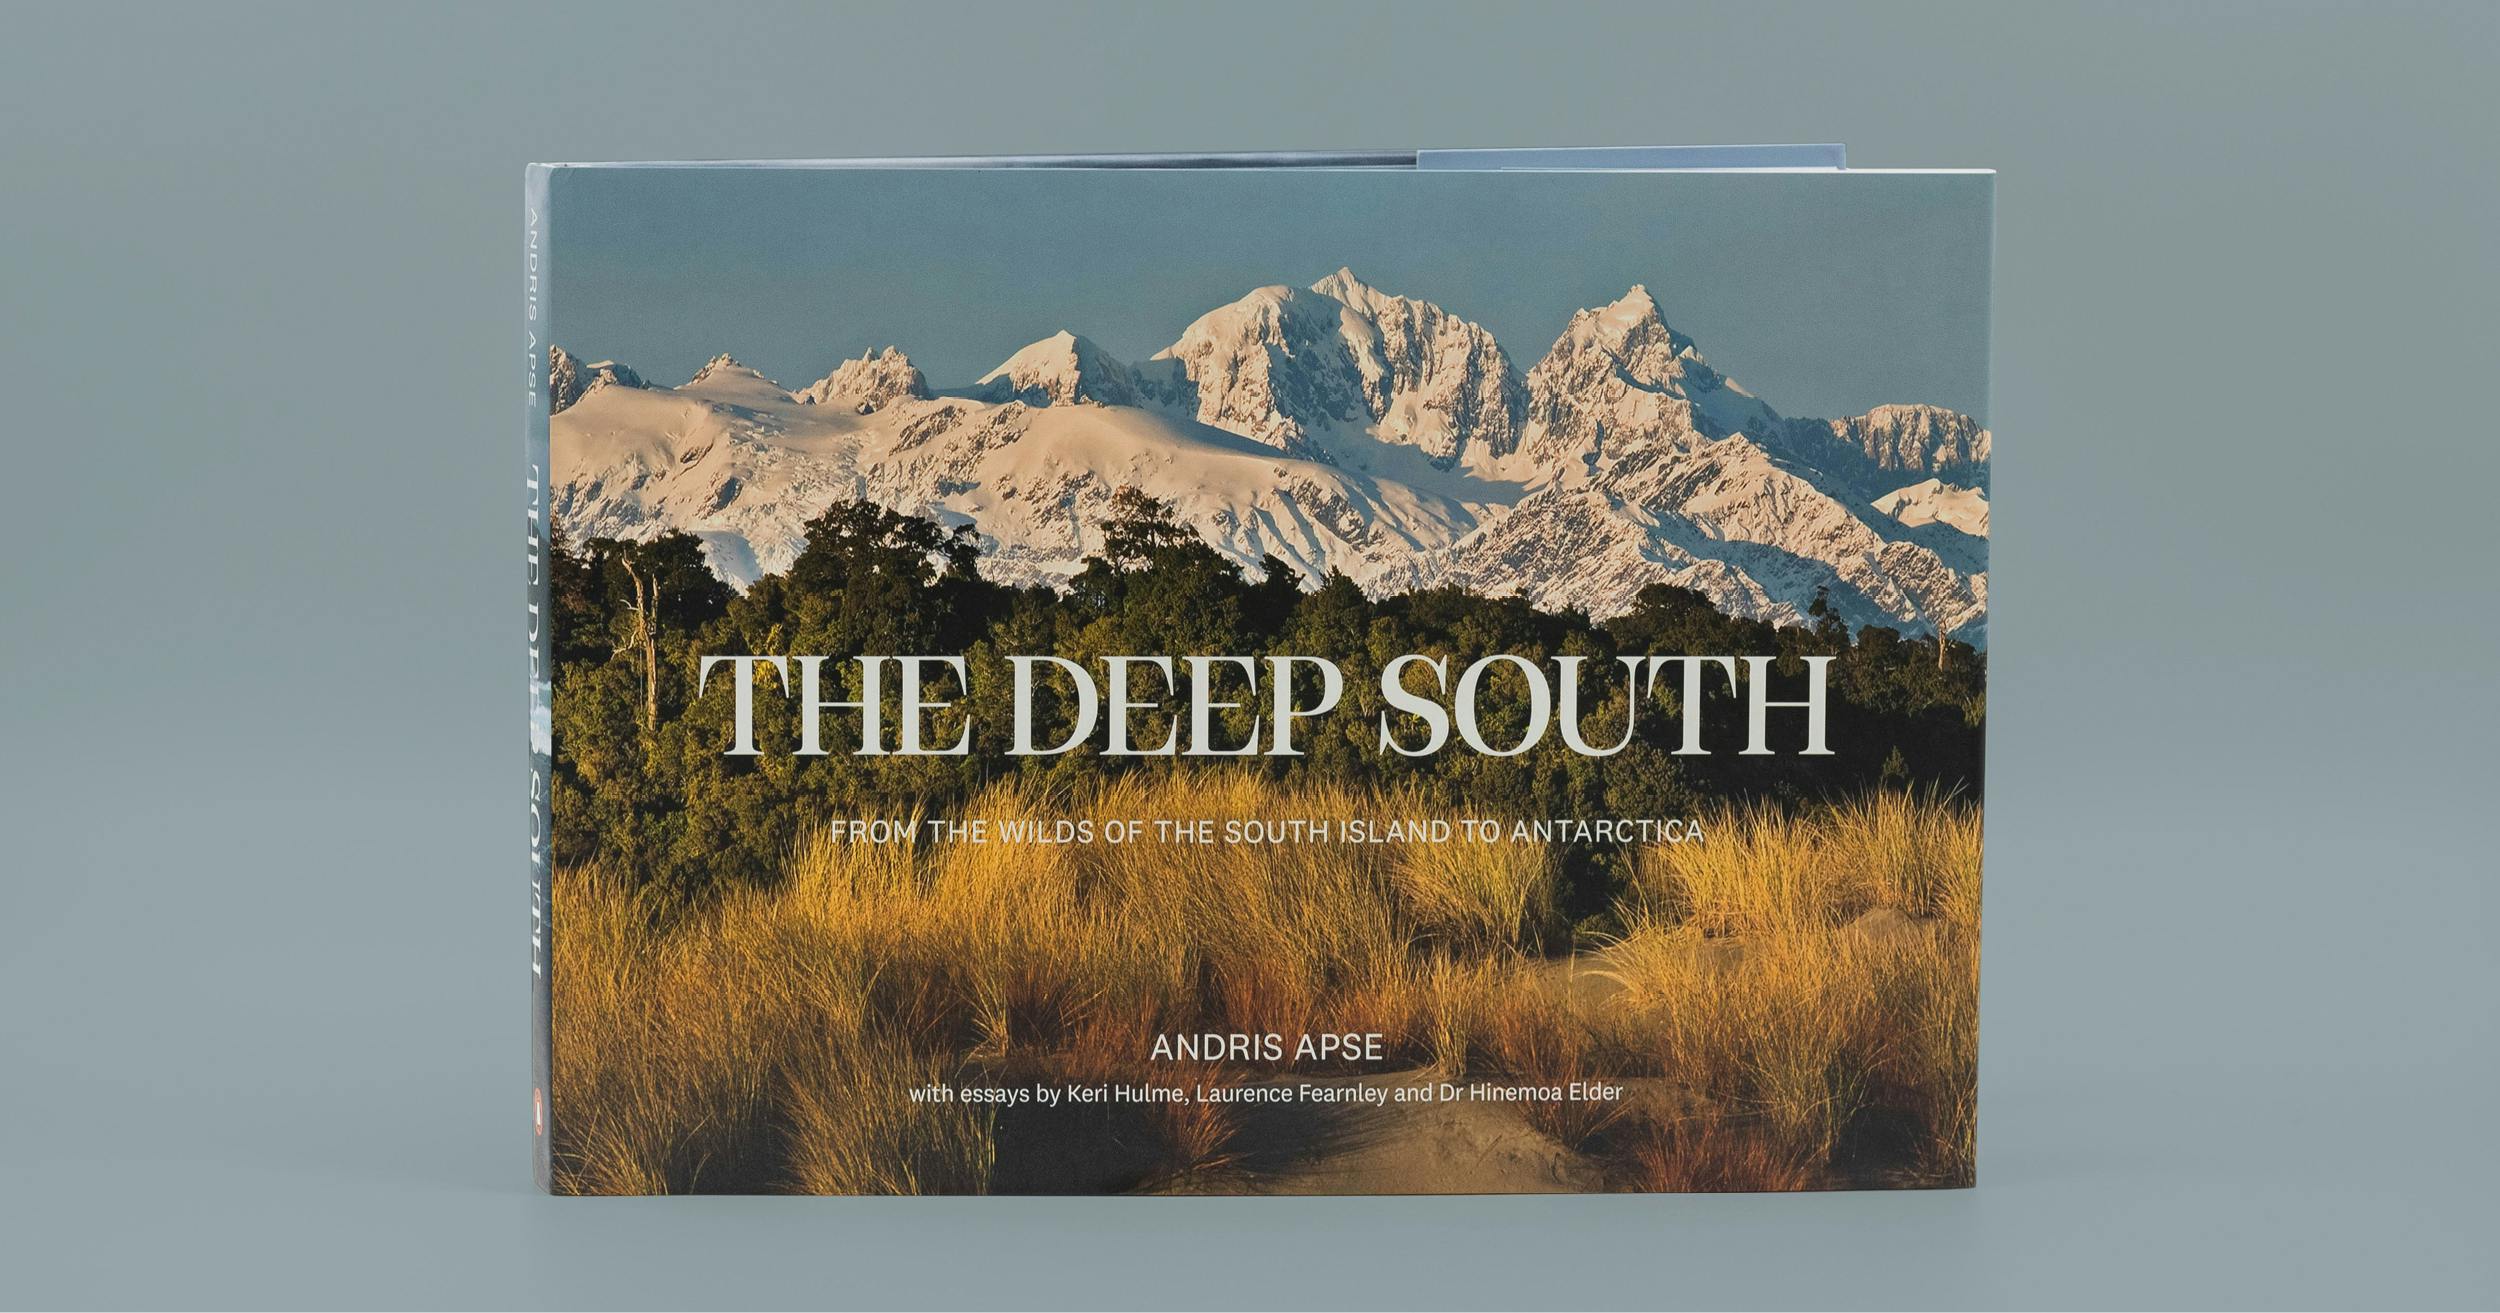 A look inside: The Deep South by Andris Apse